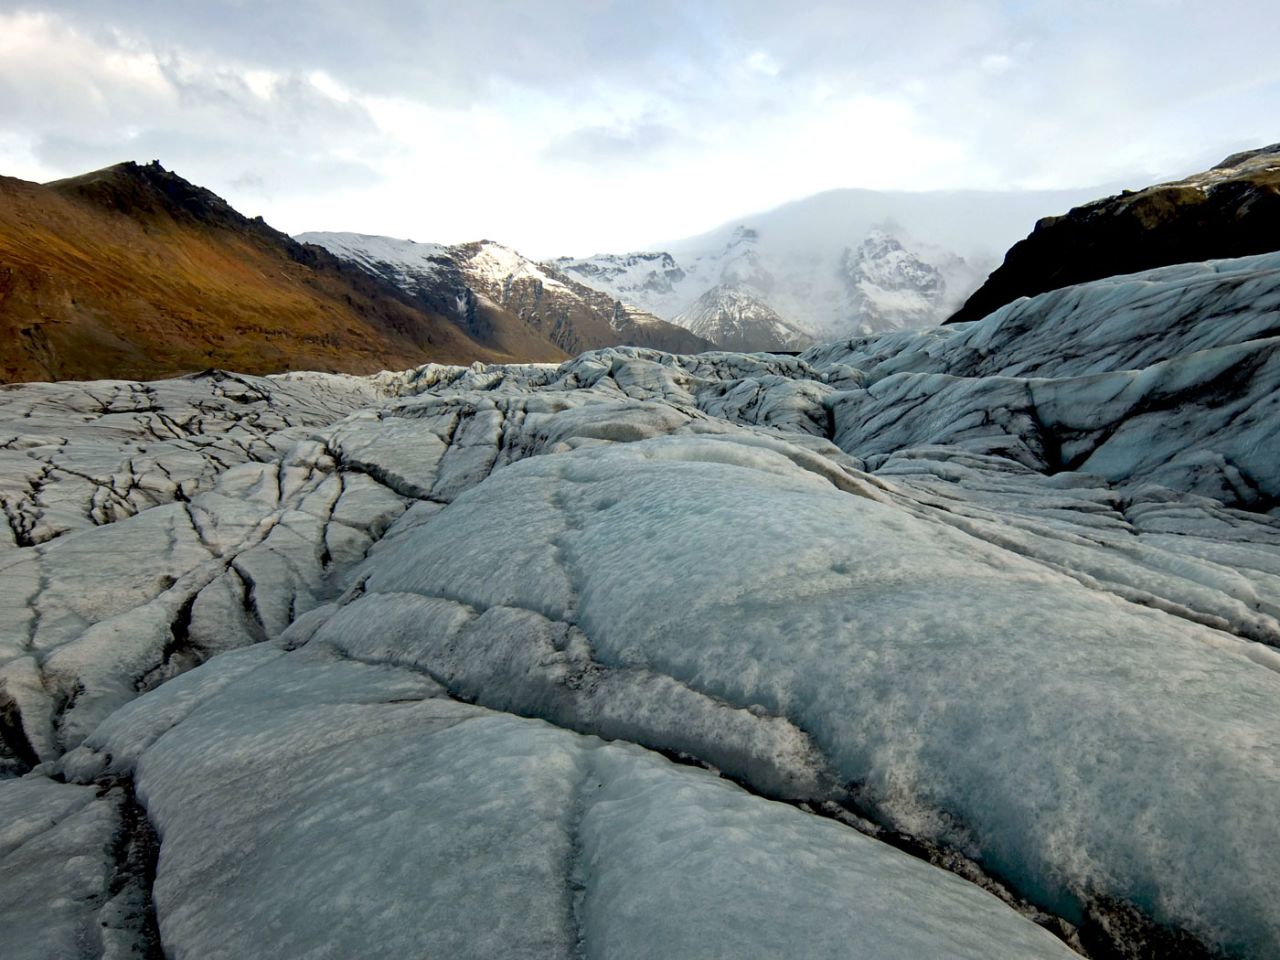 Svinafellsjokull, a glacier in the Vatnajokull National Park, is one of the locations used in the filming of new movie "Interstellar."